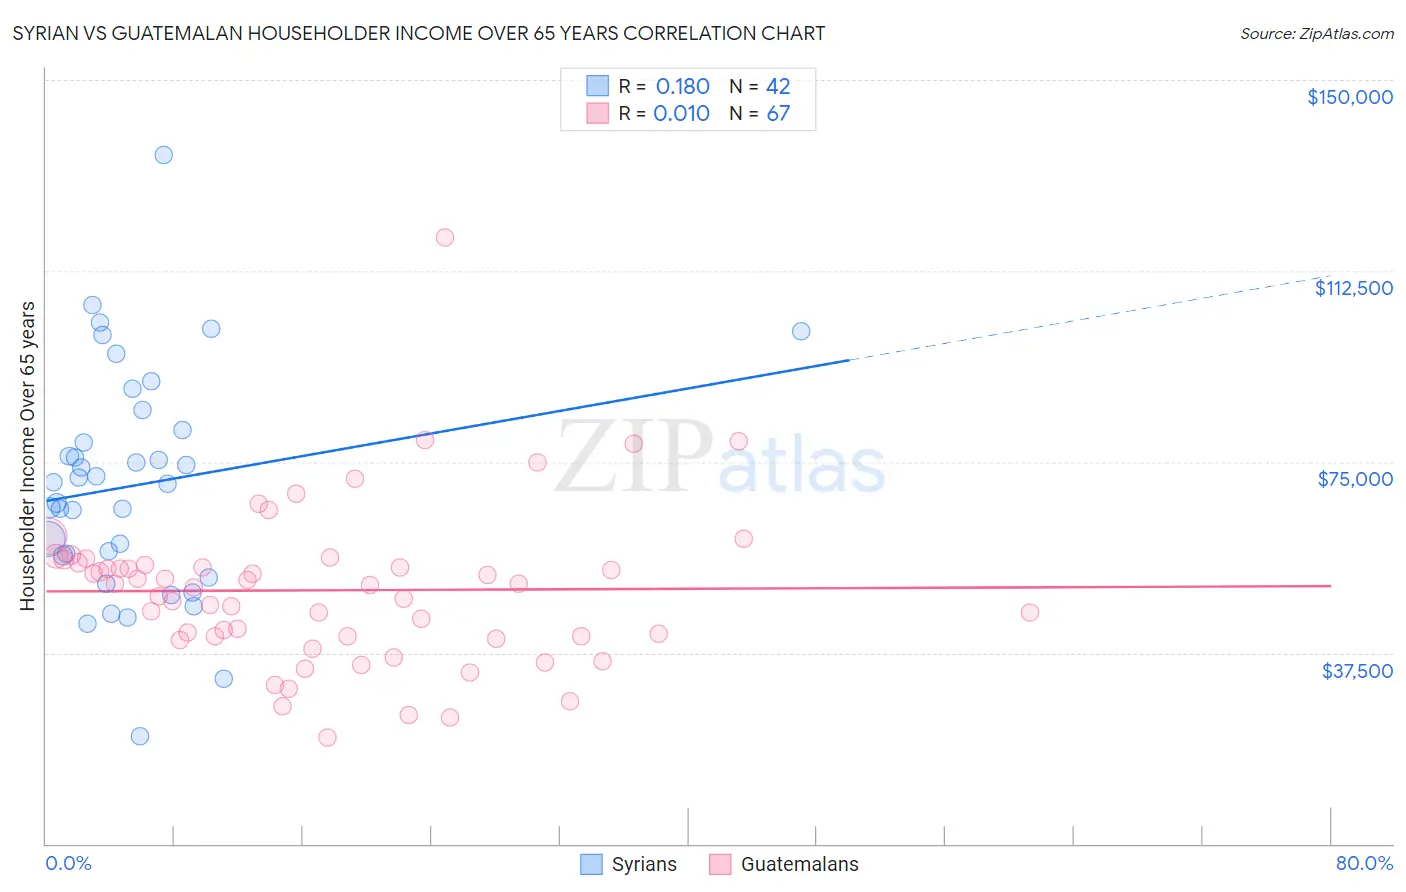 Syrian vs Guatemalan Householder Income Over 65 years